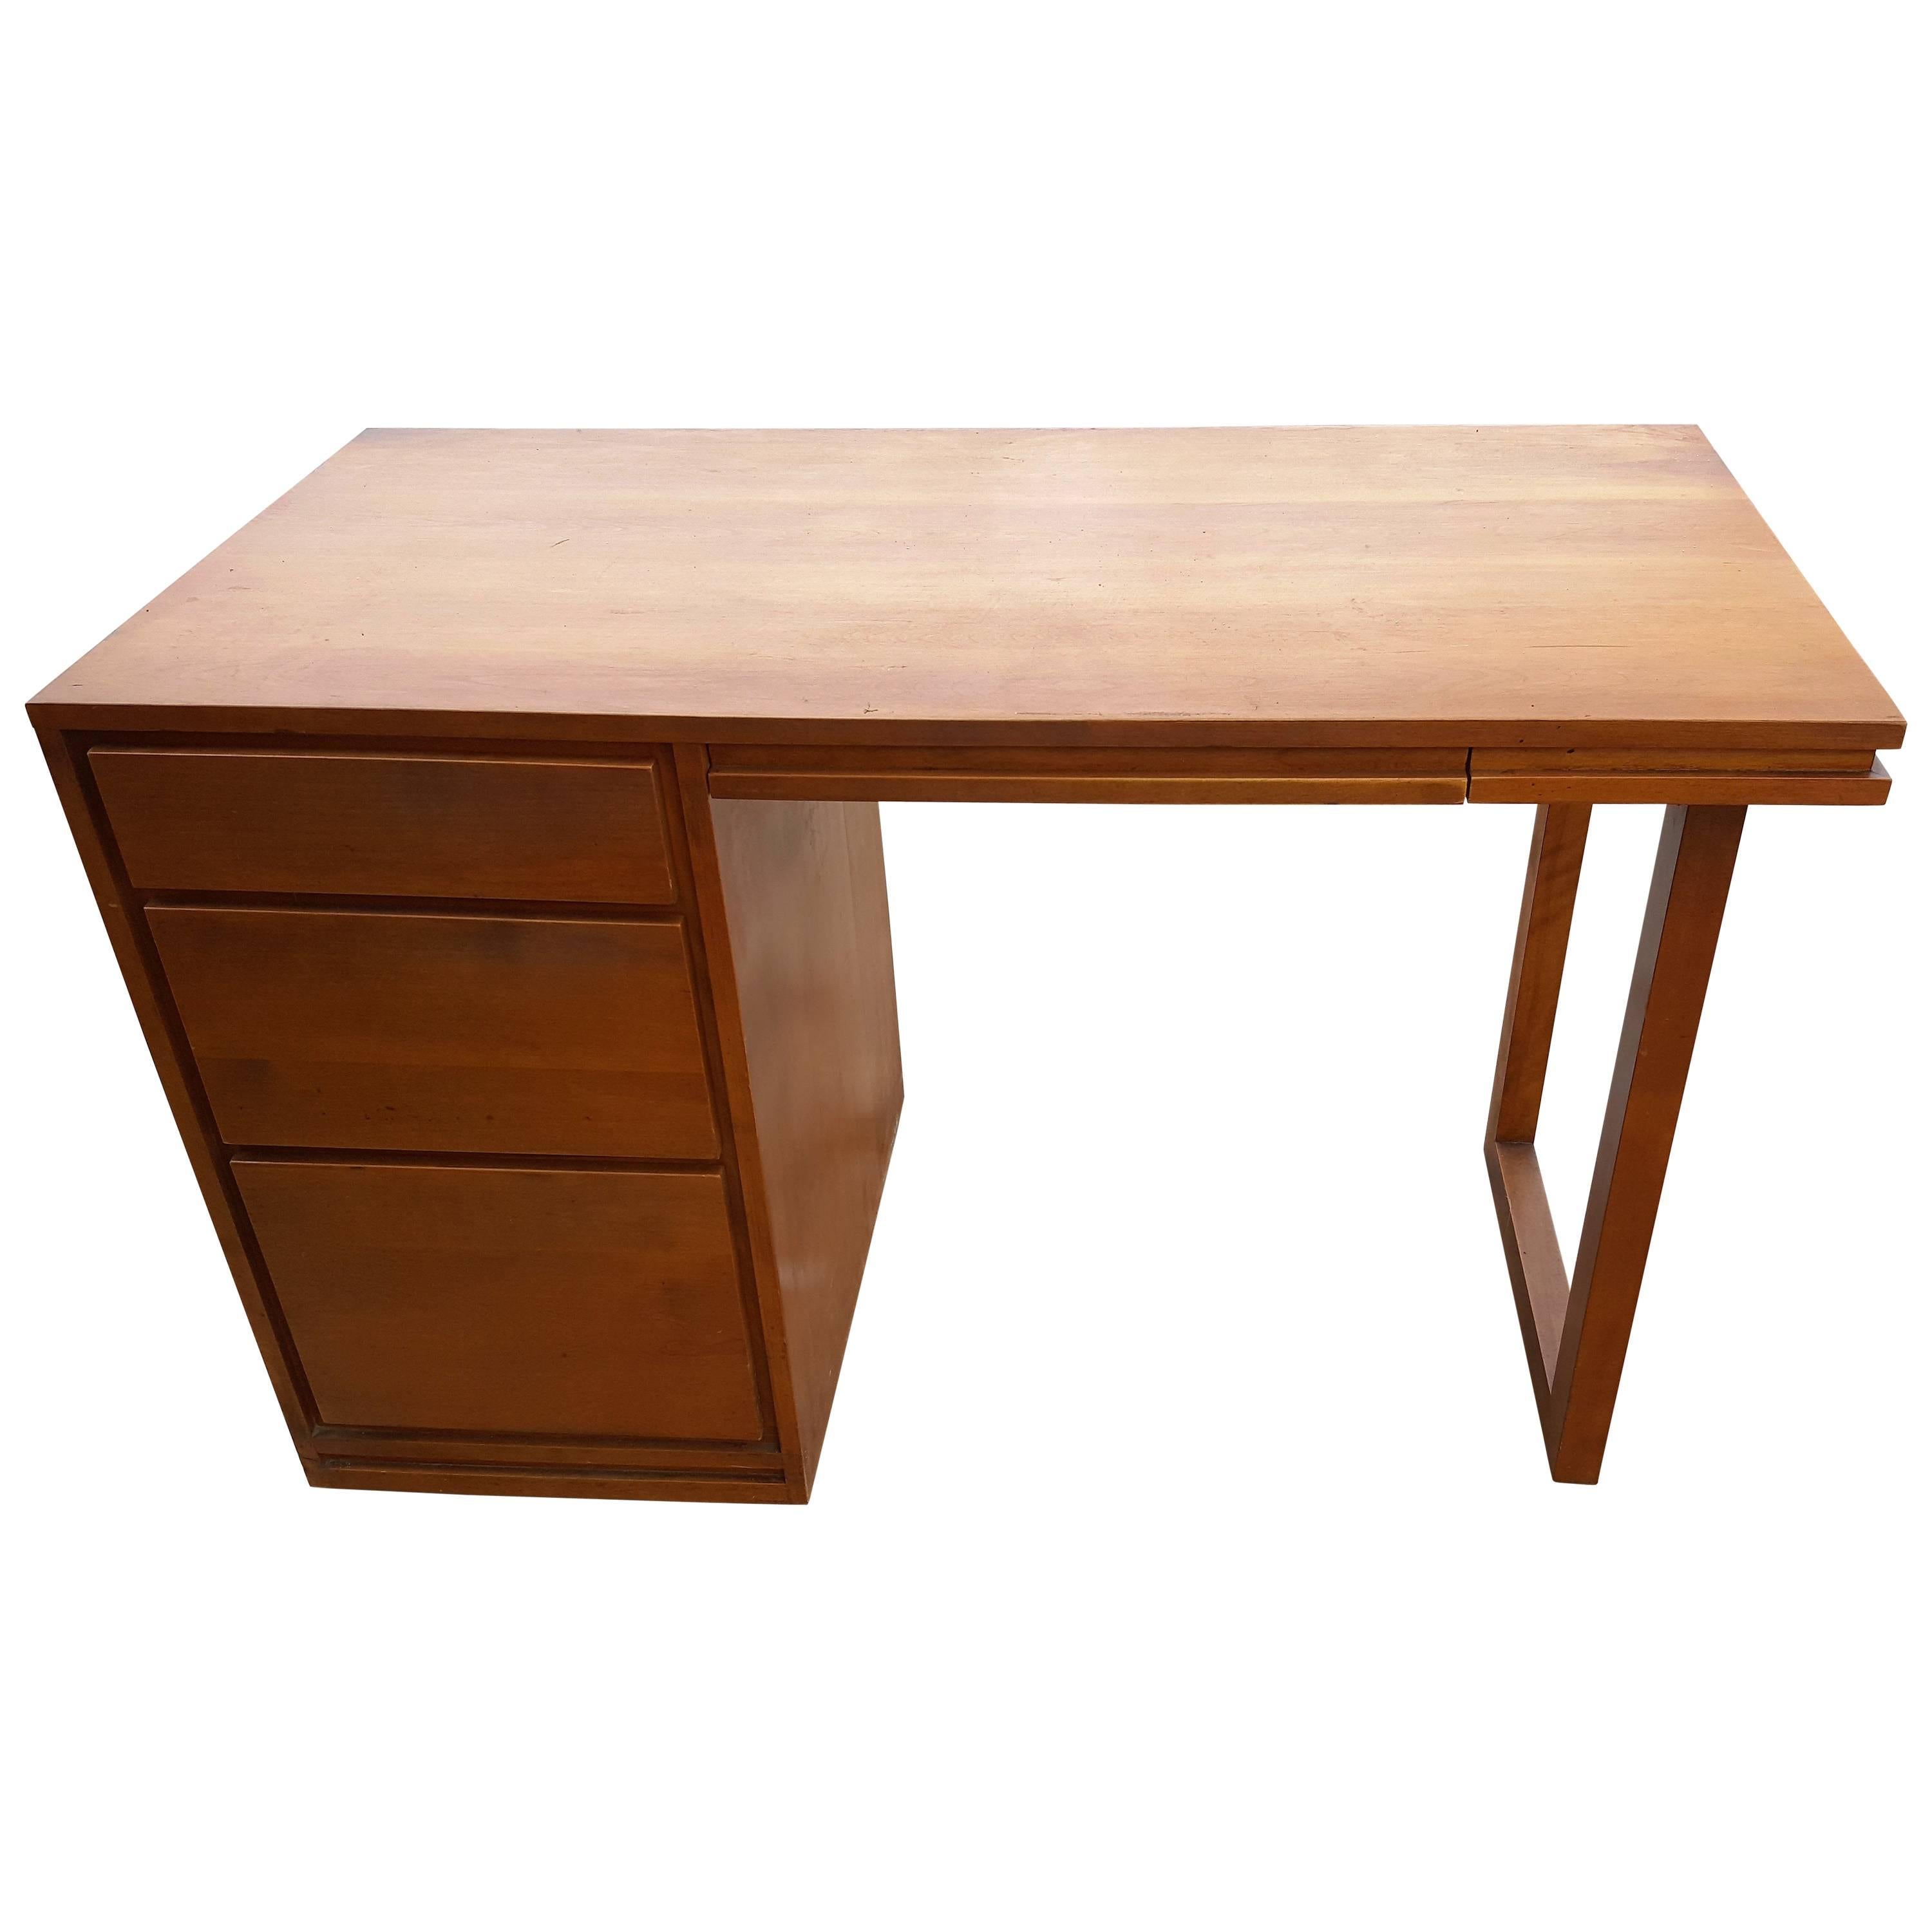 Russel Wright by Conant Ball Mid-Century Modern Birch Desk For Sale